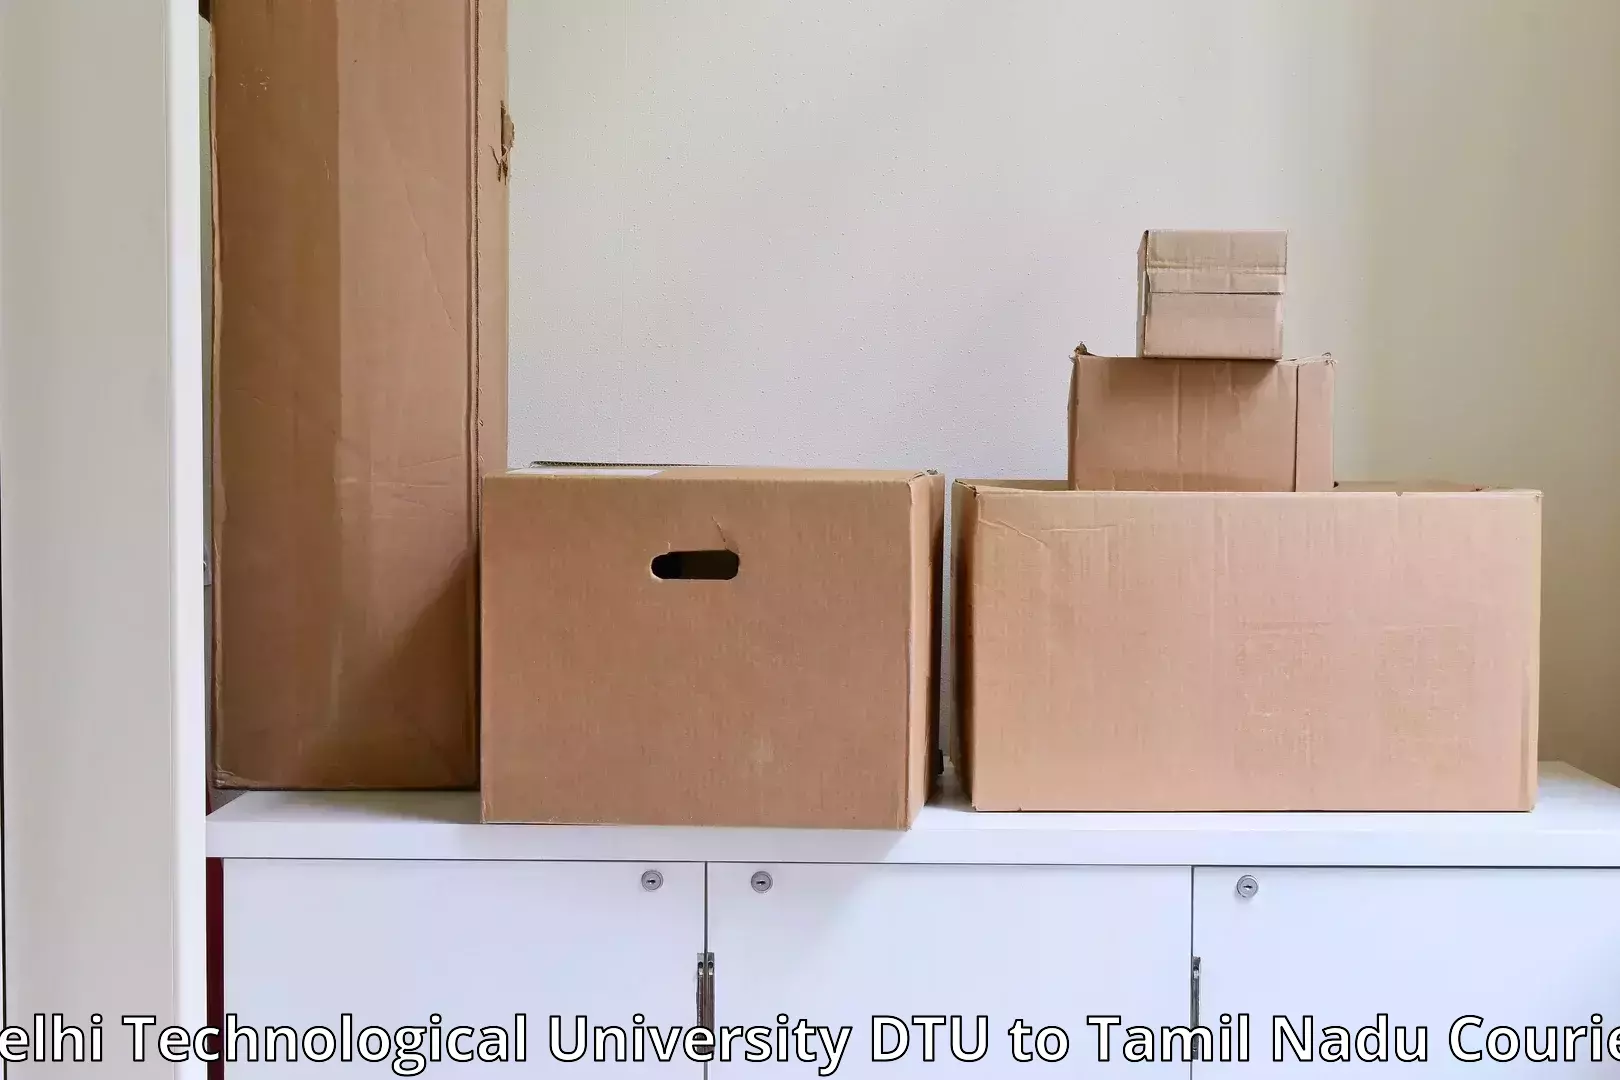 Reliable furniture movers Delhi Technological University DTU to Chennai Port